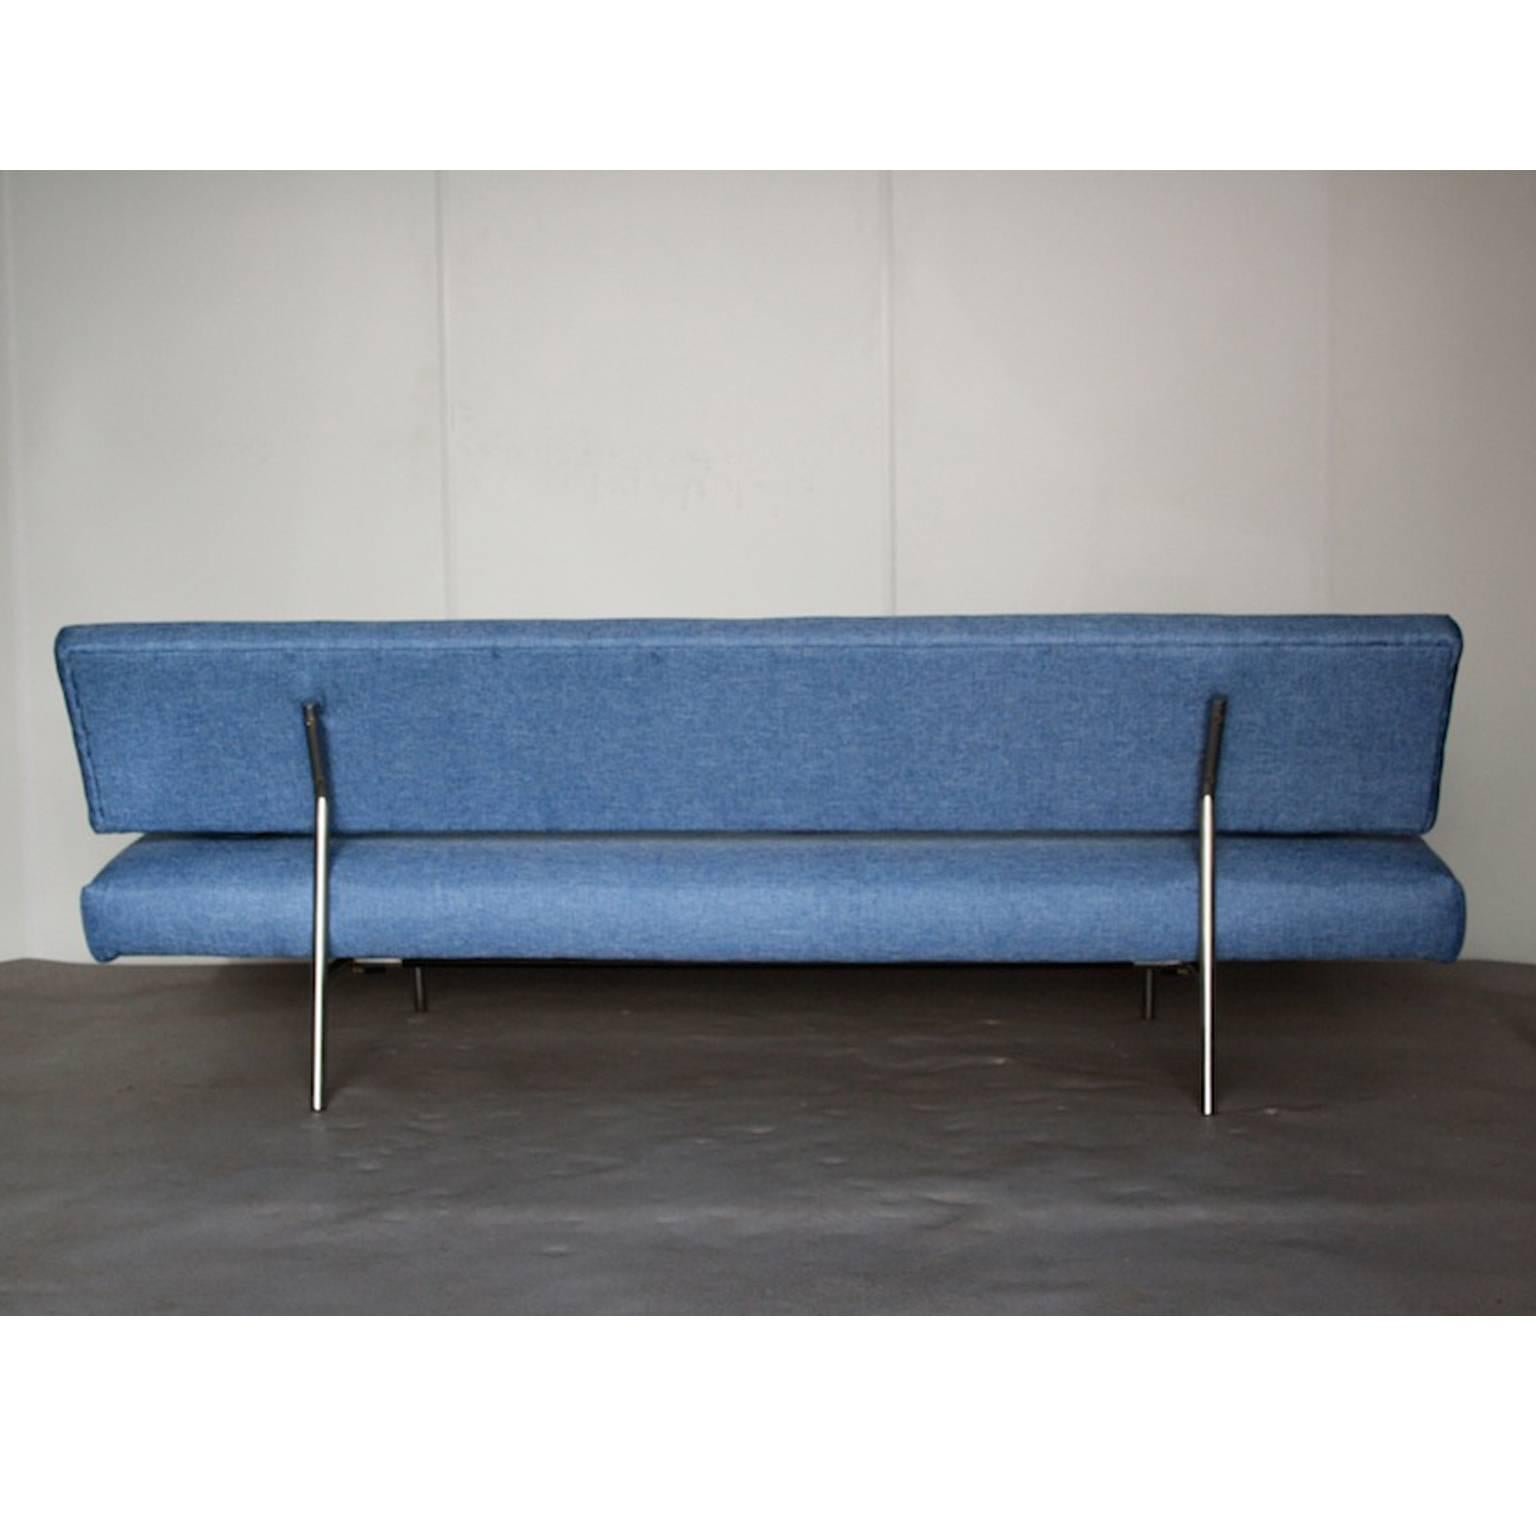 BR 02.7 Sleeper Sofa with Arm Rests by Martin Visser for 't Spectrum, Dutch In Good Condition For Sale In Lijnden, Noord-Holland